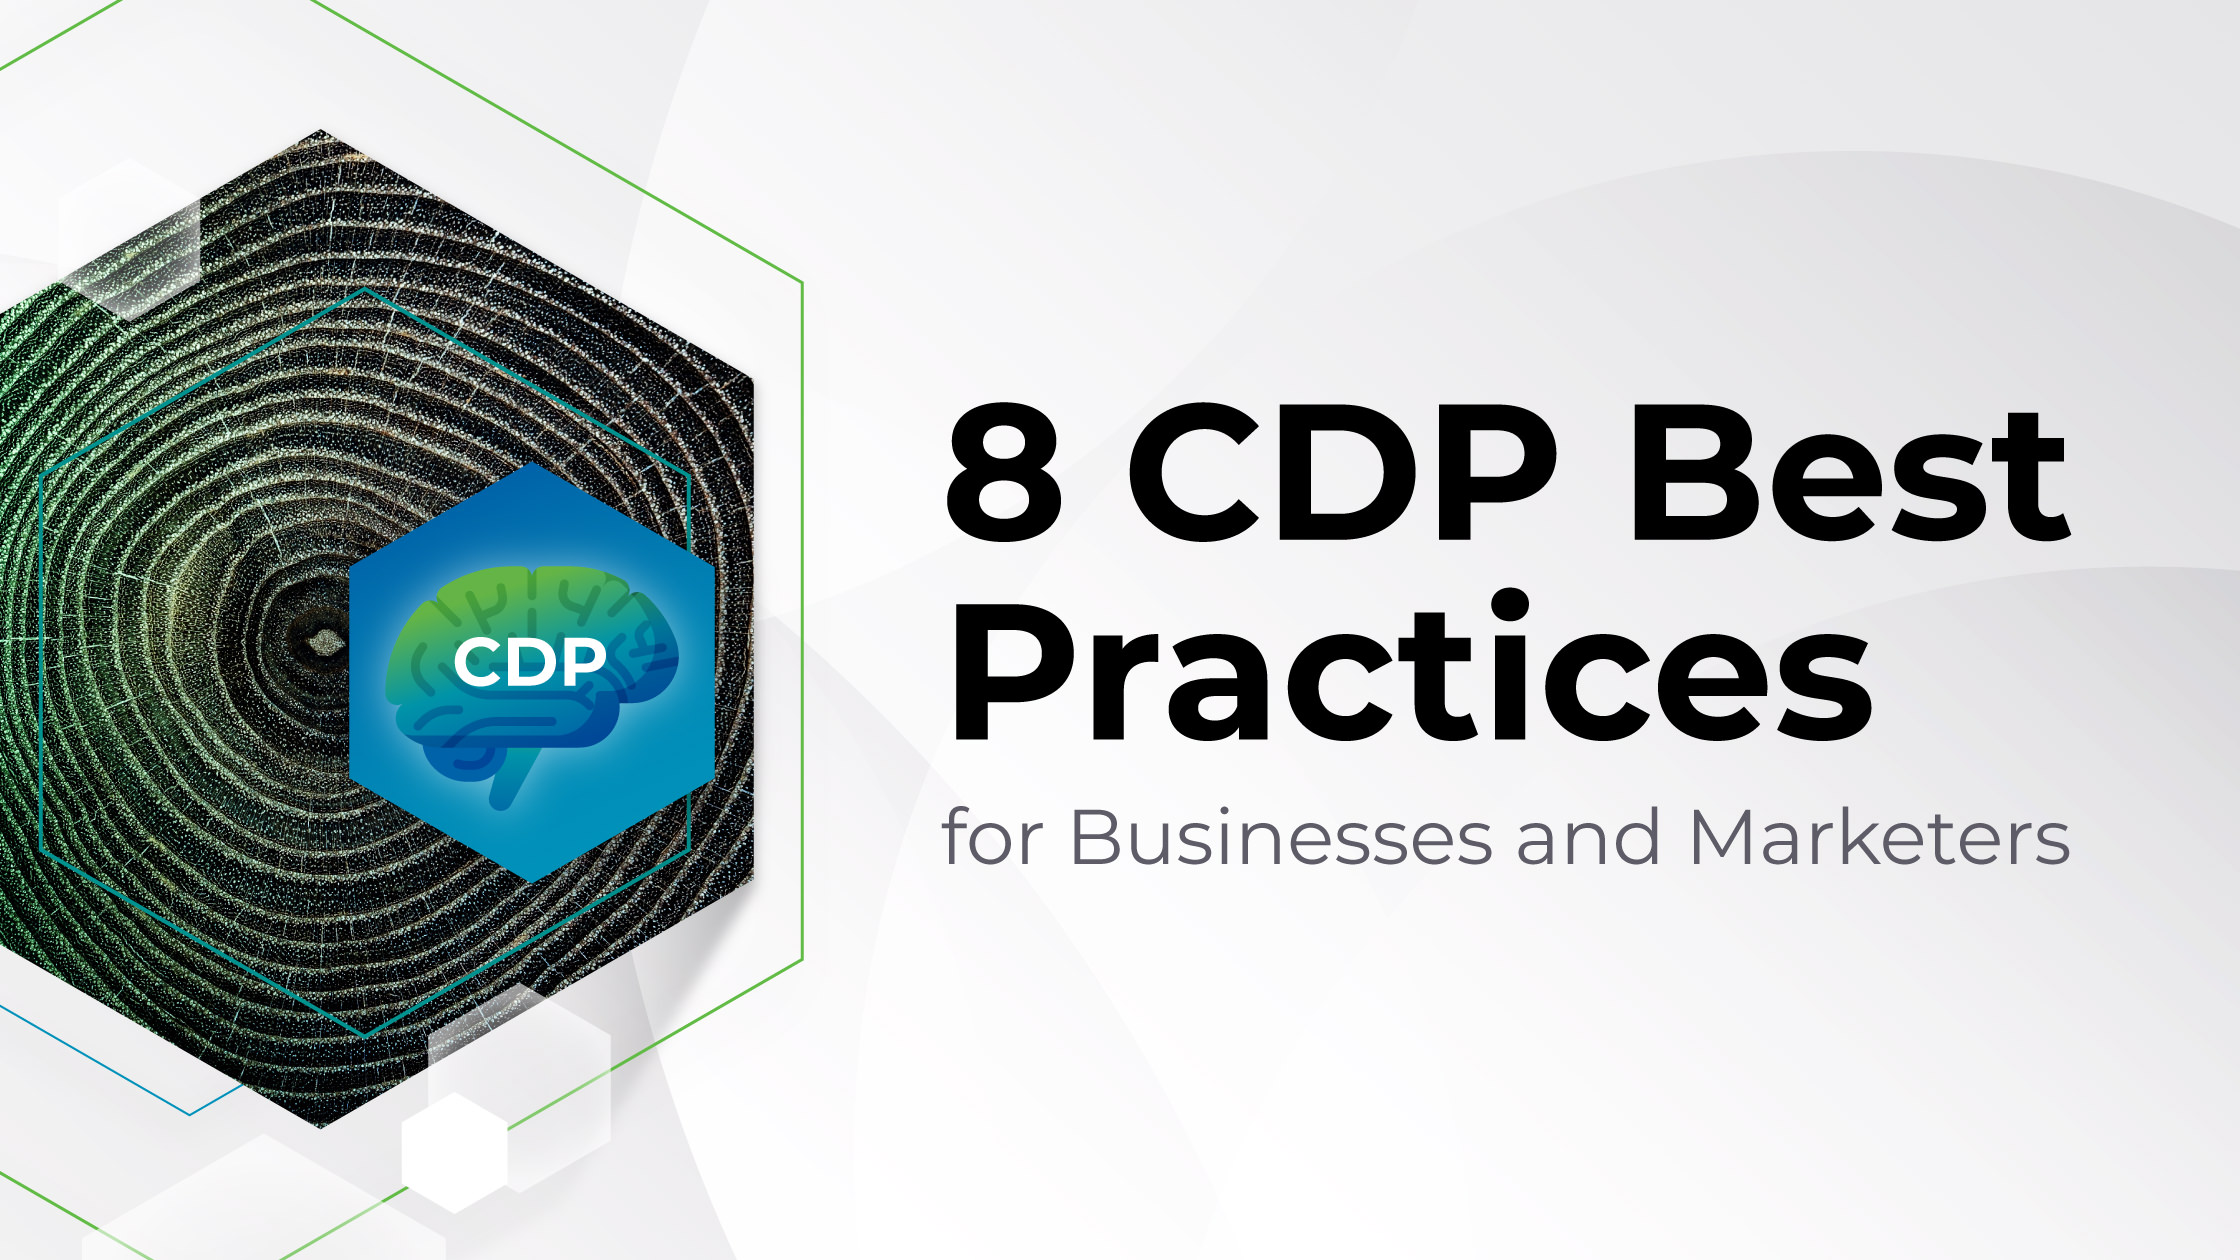 8 CDP Best Practices for Businesses and Marketers